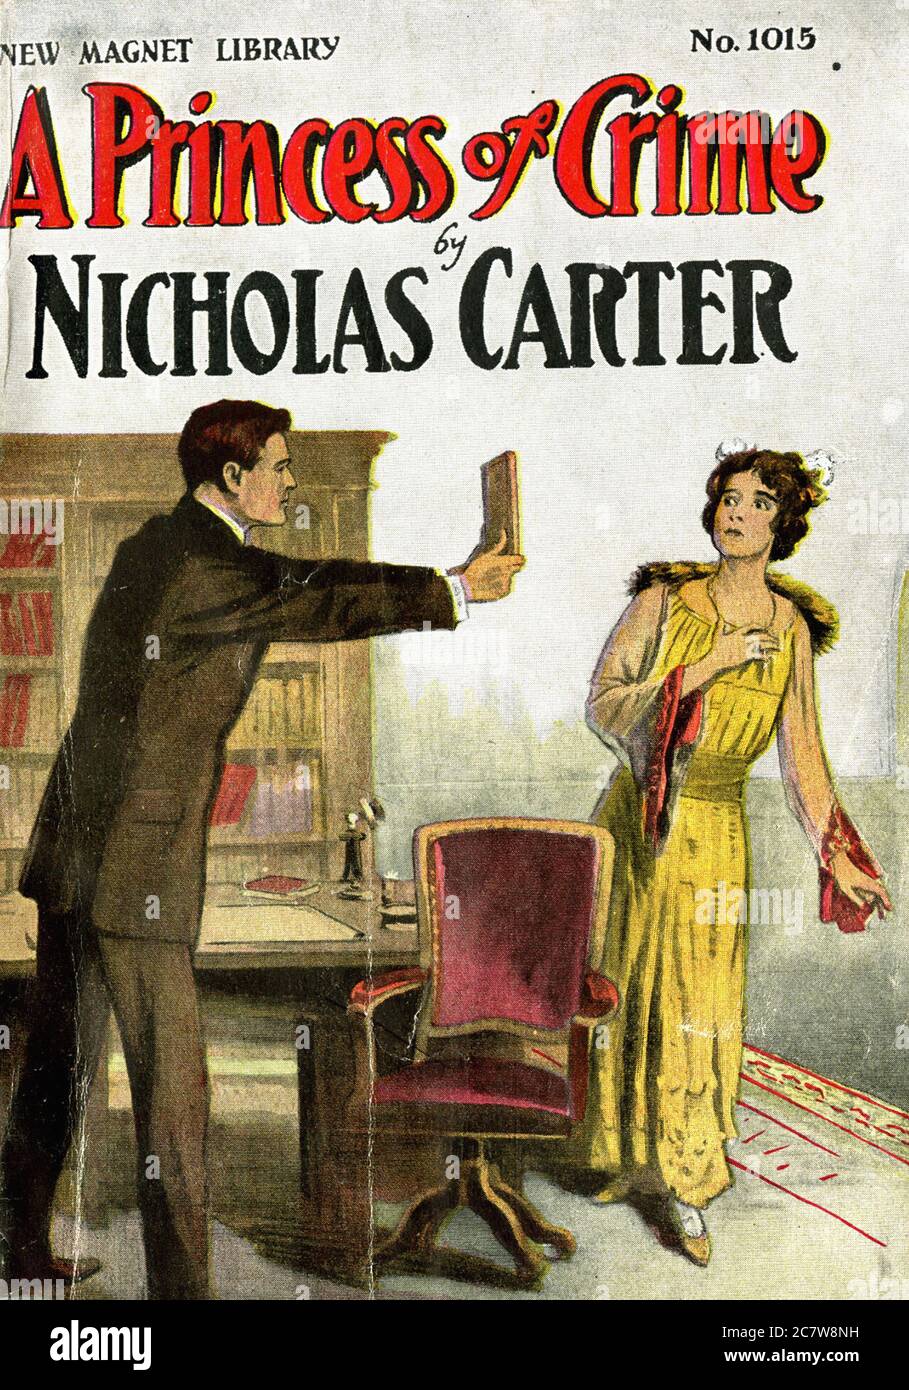 Nicholas Carter - A Princess of Crime - New Magnet Library - Vintage Pulp Literary Stock Photo